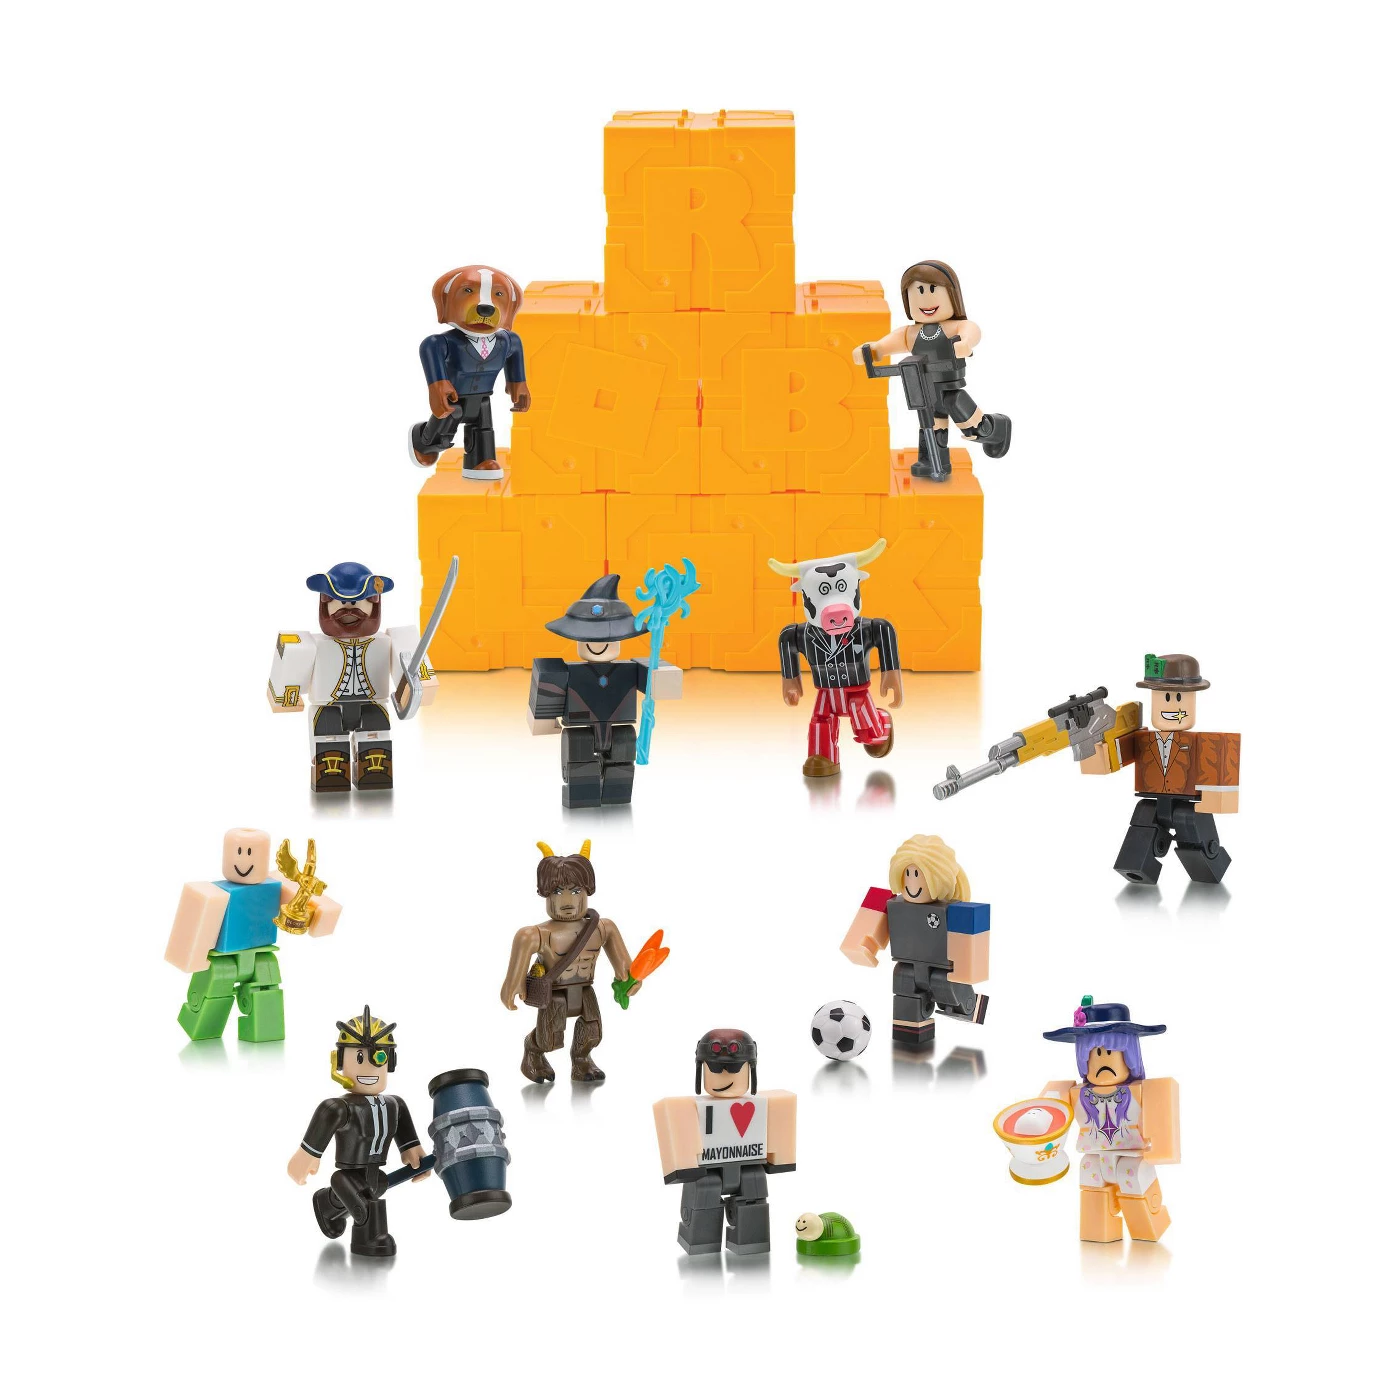 Roblox Series 5 Yellow Gold Blind Box Toys Figures 1 2 3 4 Exclusive Game Codes Ebay - roblox toys buy roblox toys online at best prices in india